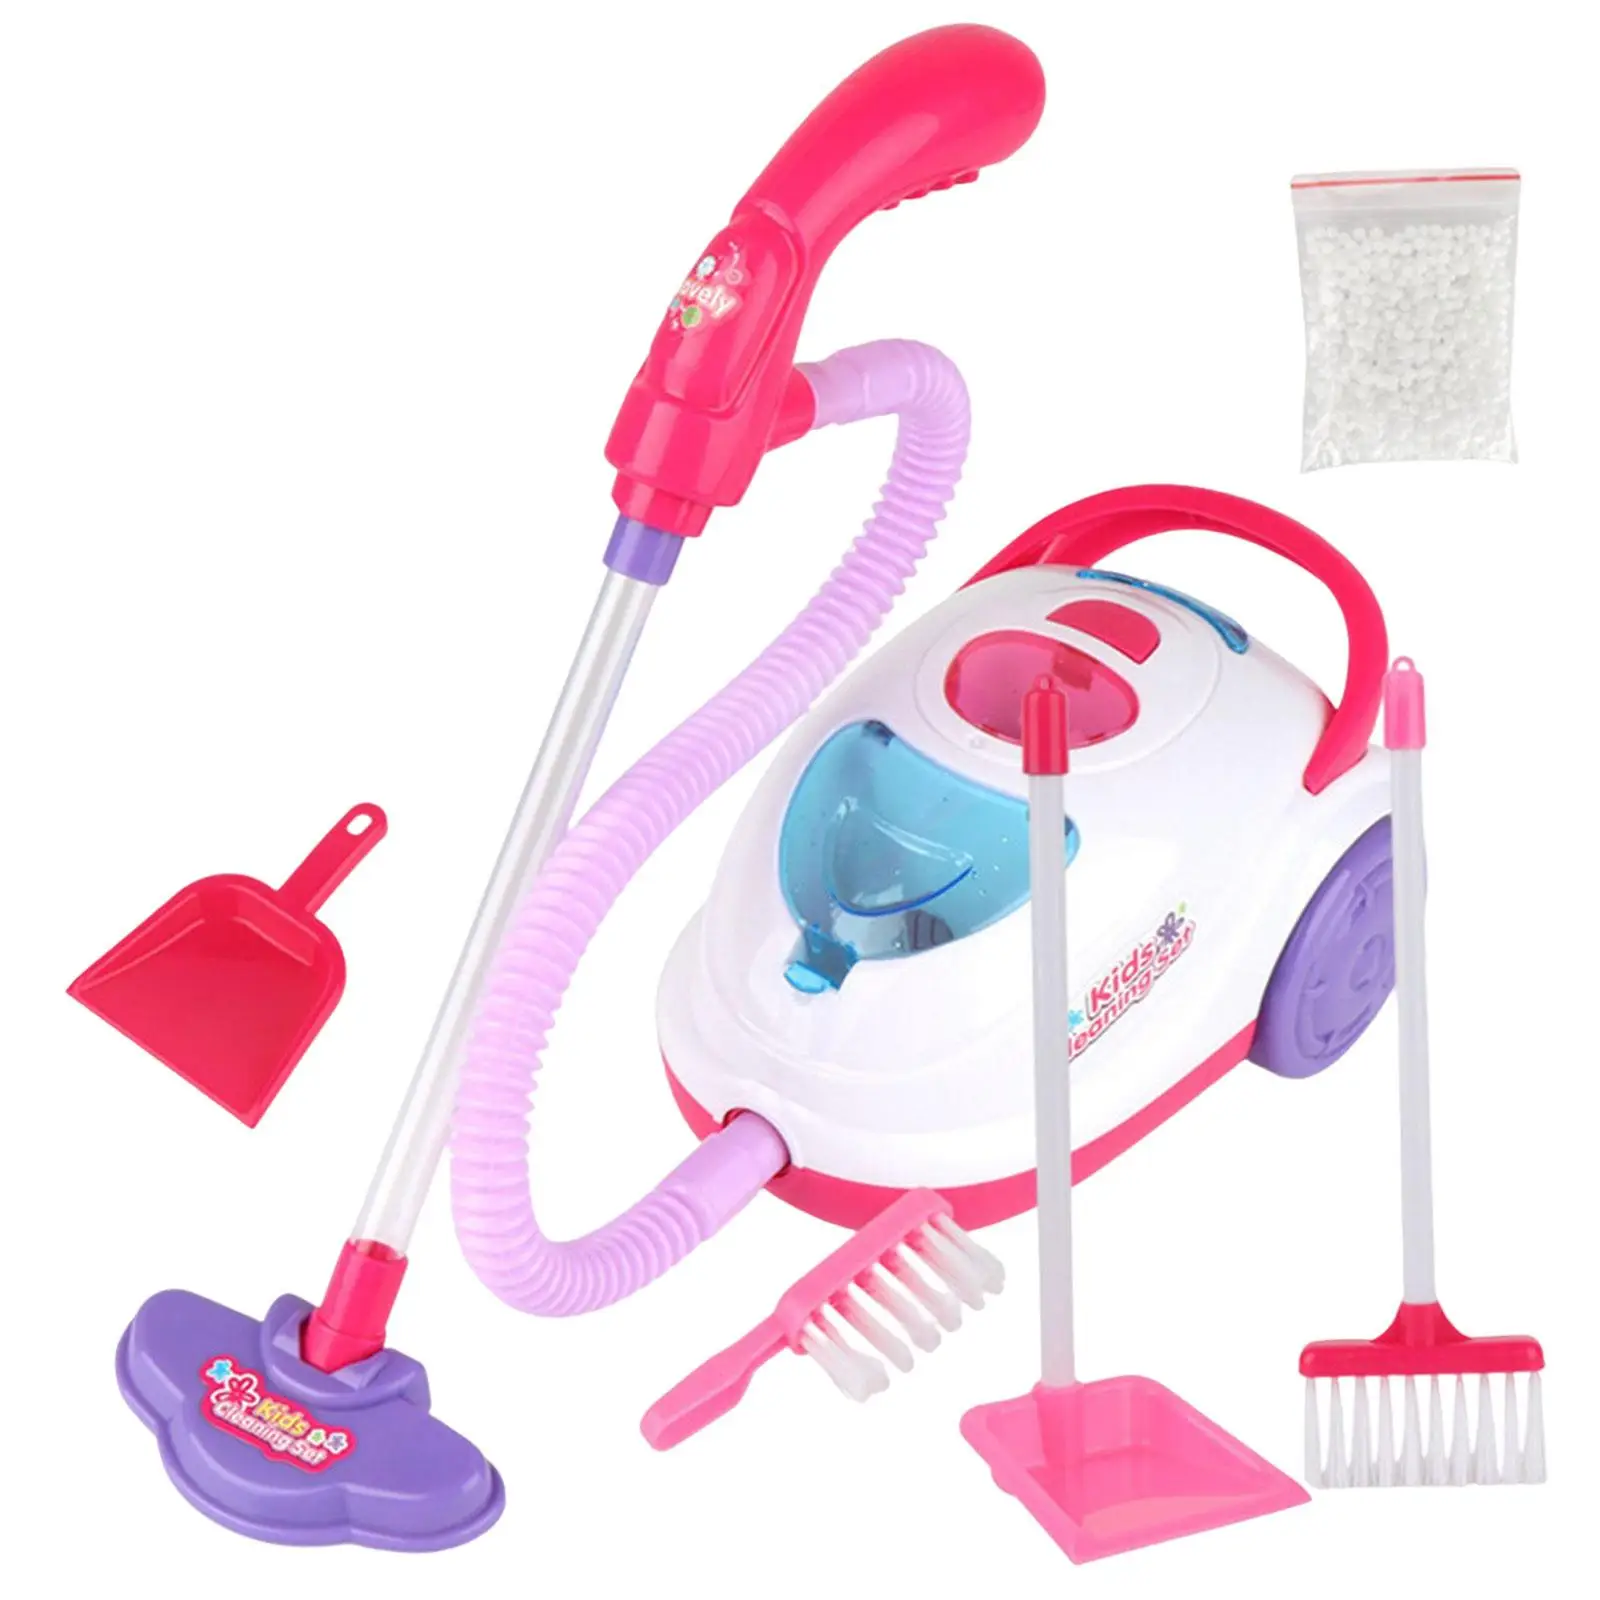 Home Pink Vacuum Cleaner Set,Pretend  House Cleaning set with Lights for Kids Ages 3 and Up